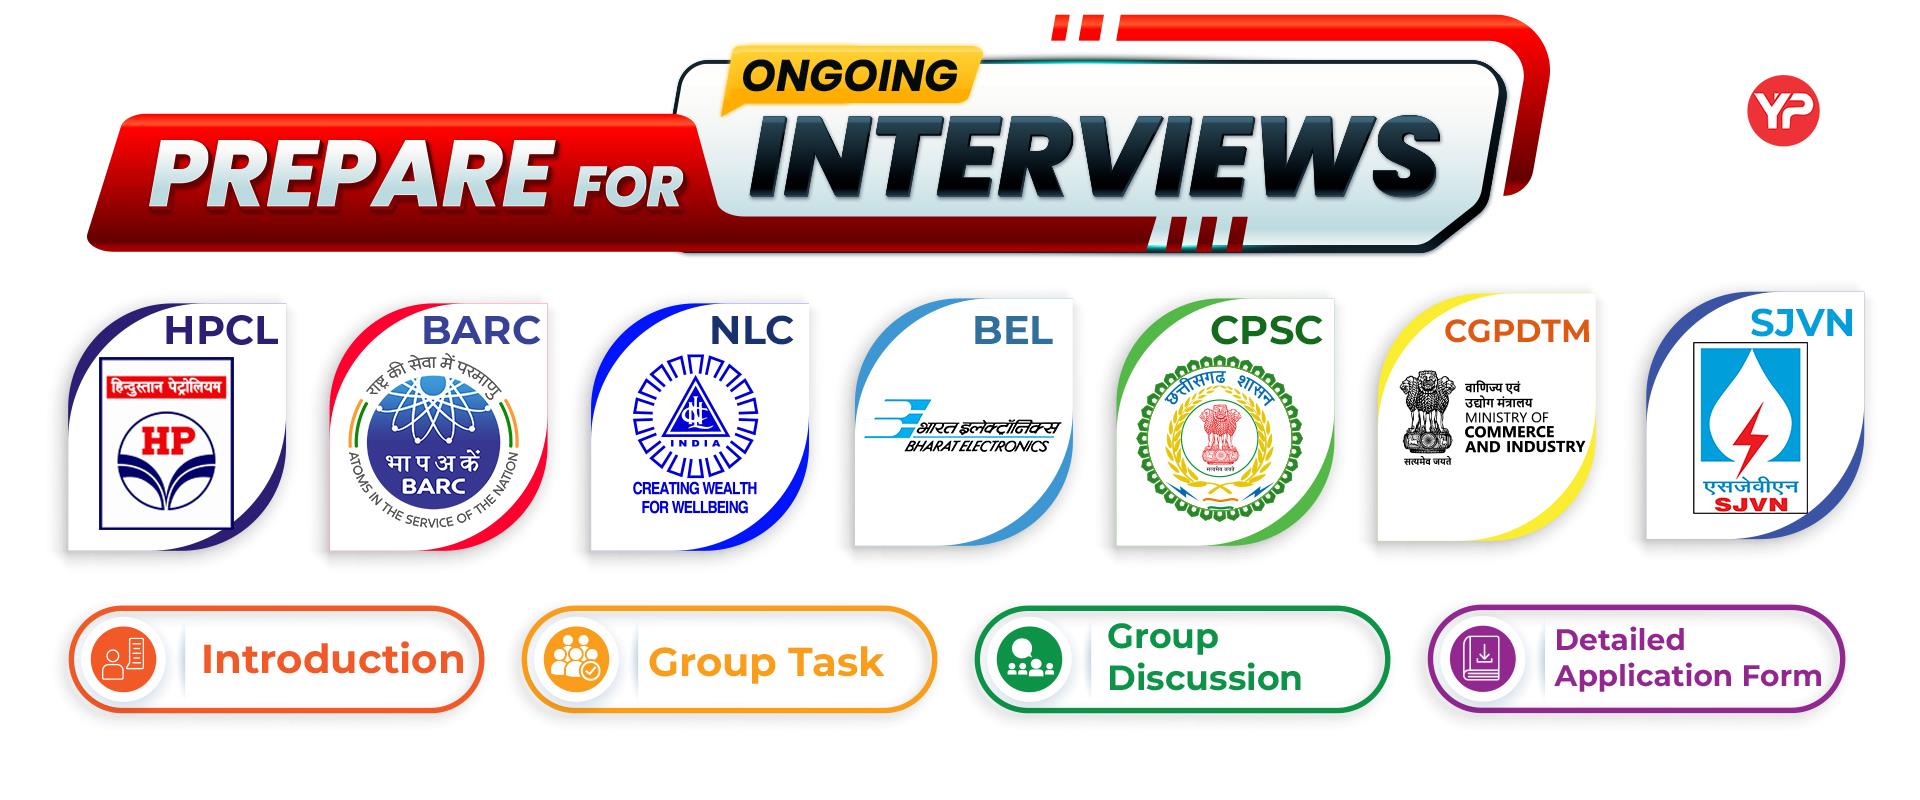 ongoing interviews